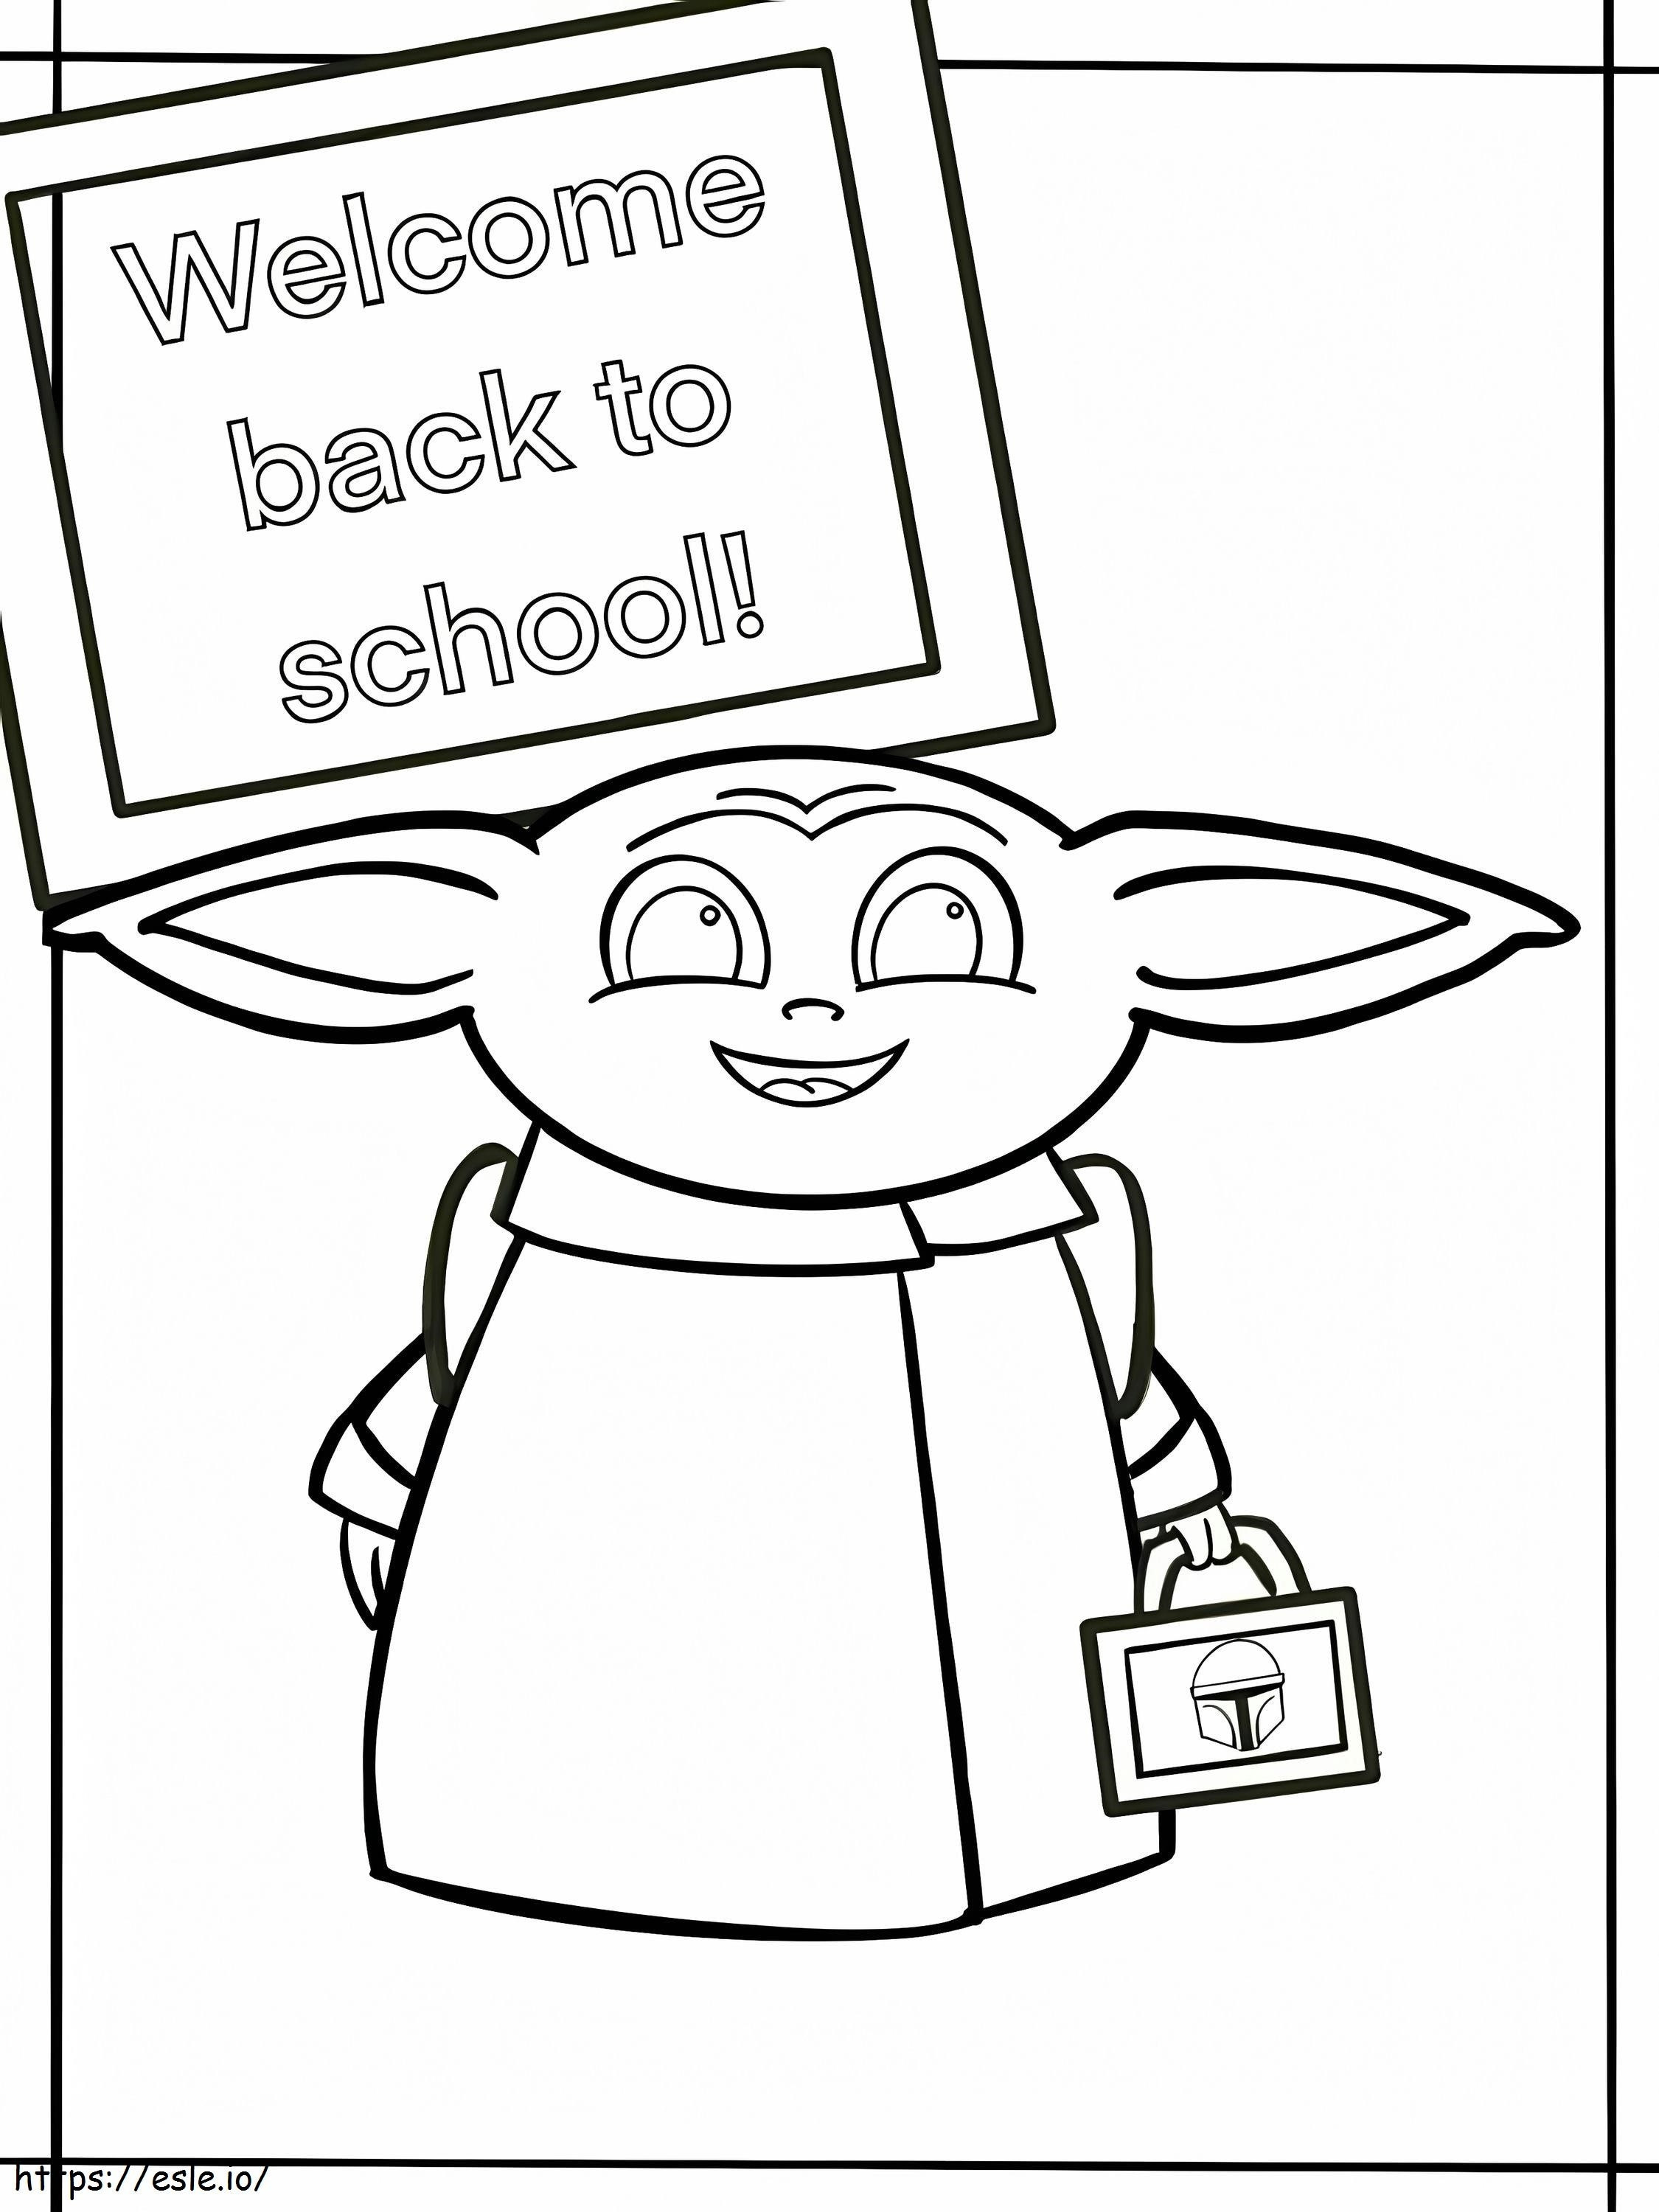 Baby Yoda Back To School coloring page